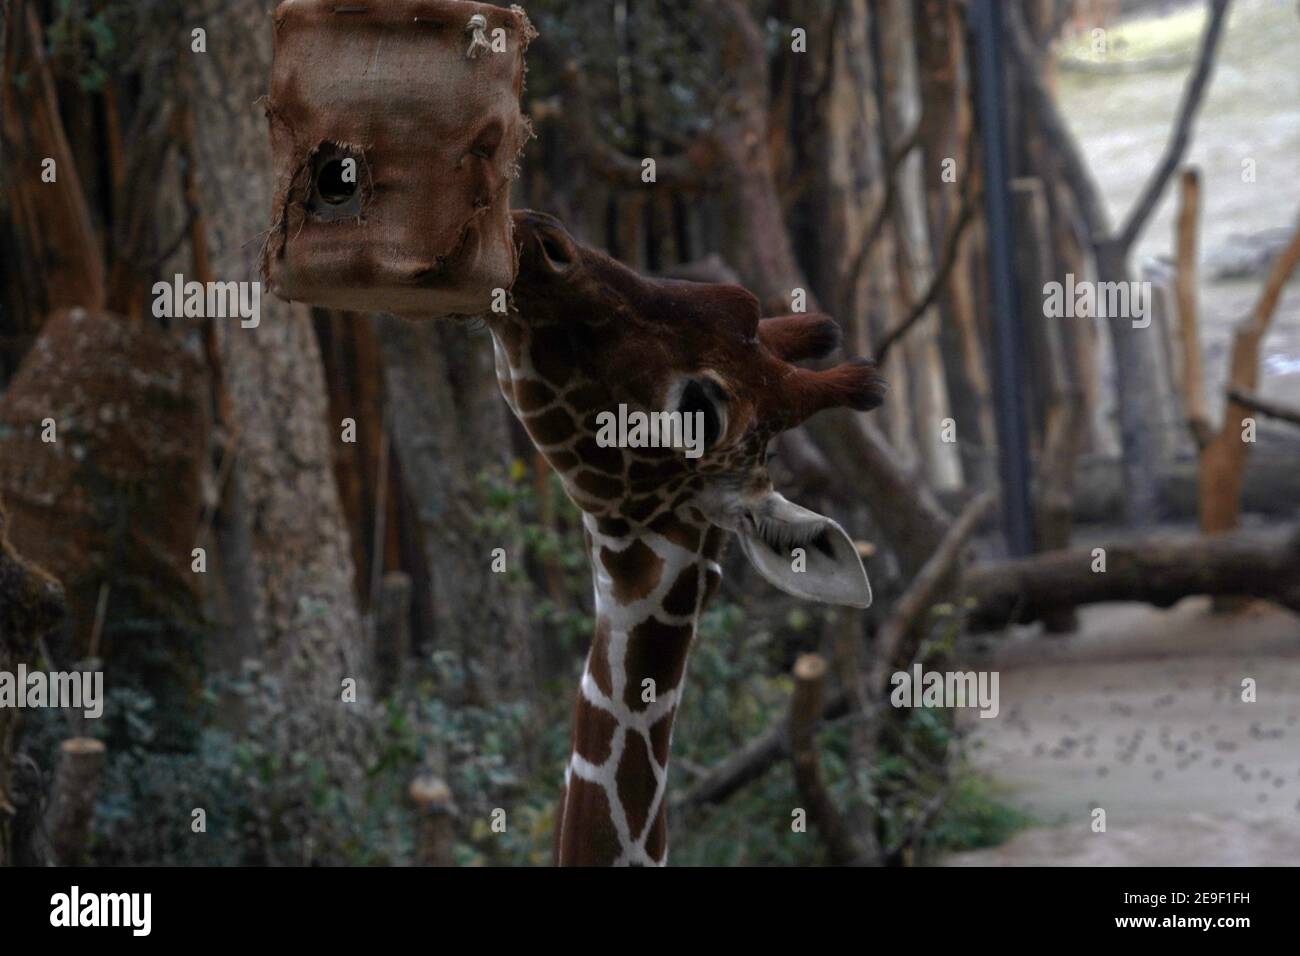 Giraffe, in Latin called Giraffa camelopardalis, head in lateral close up view. She is looking for food. It is an animal living in captivity. Stock Photo